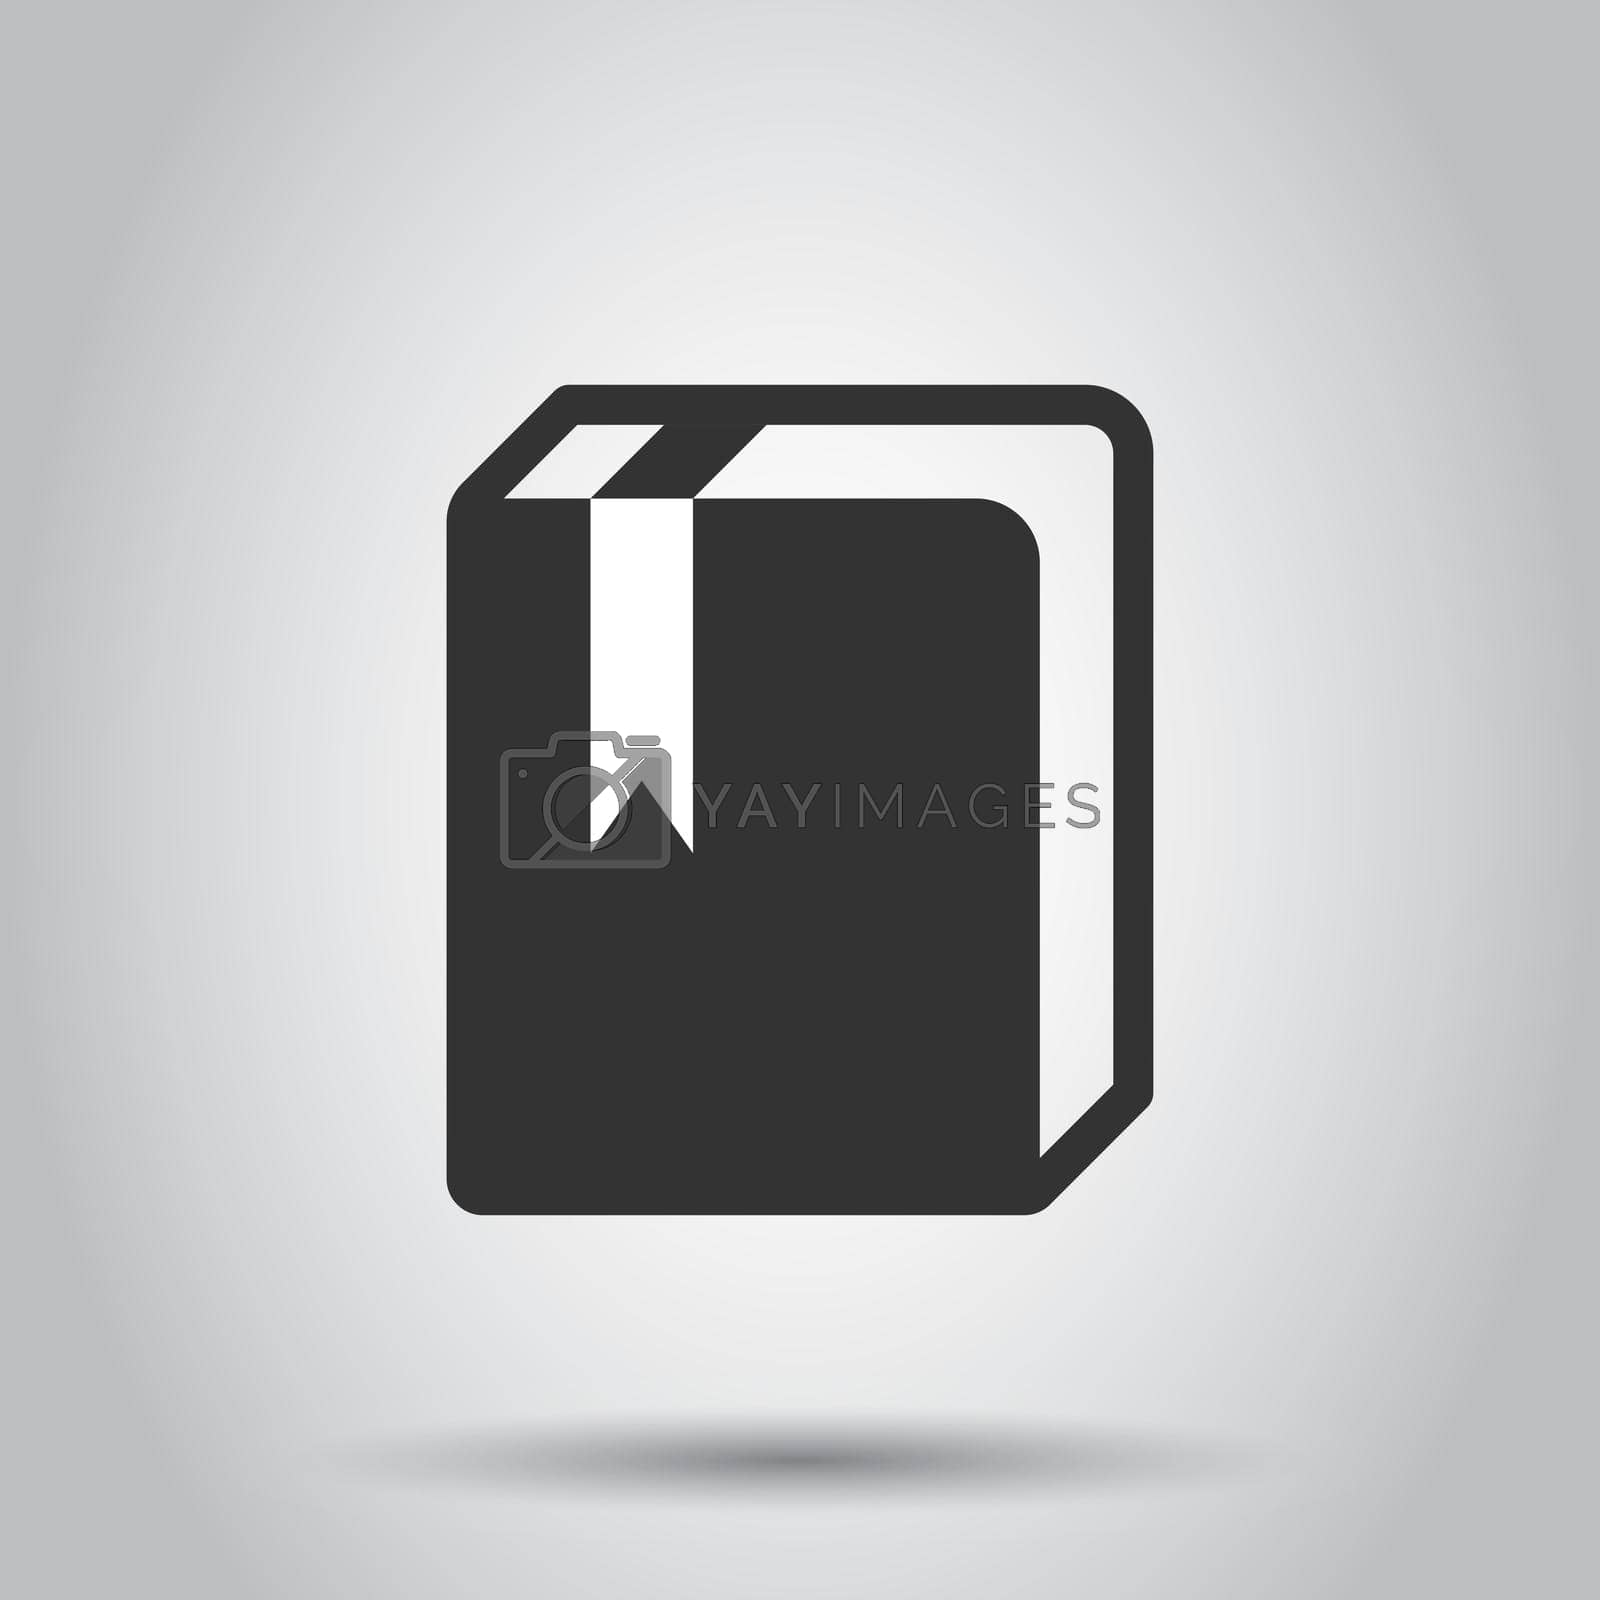 Book library vector icon in flat style. Education symbol illustration on white background. Book business concept.